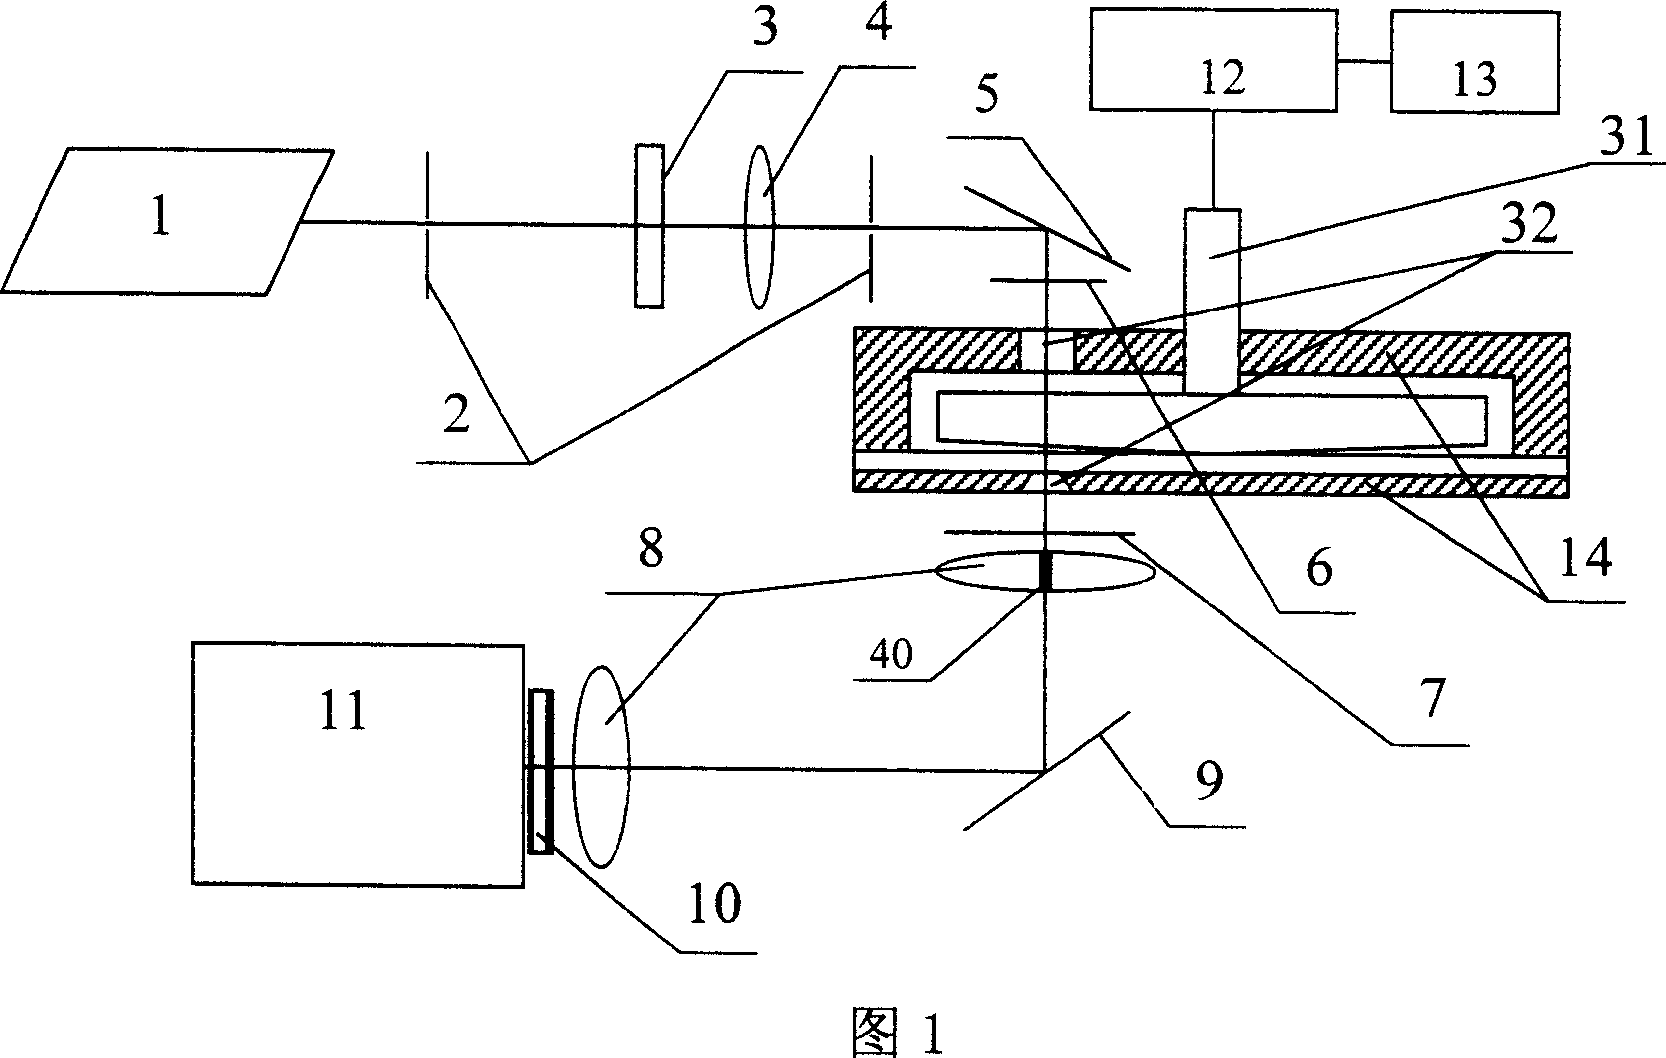 In-situ observation system combining laser light scattering and microscope under the shear field